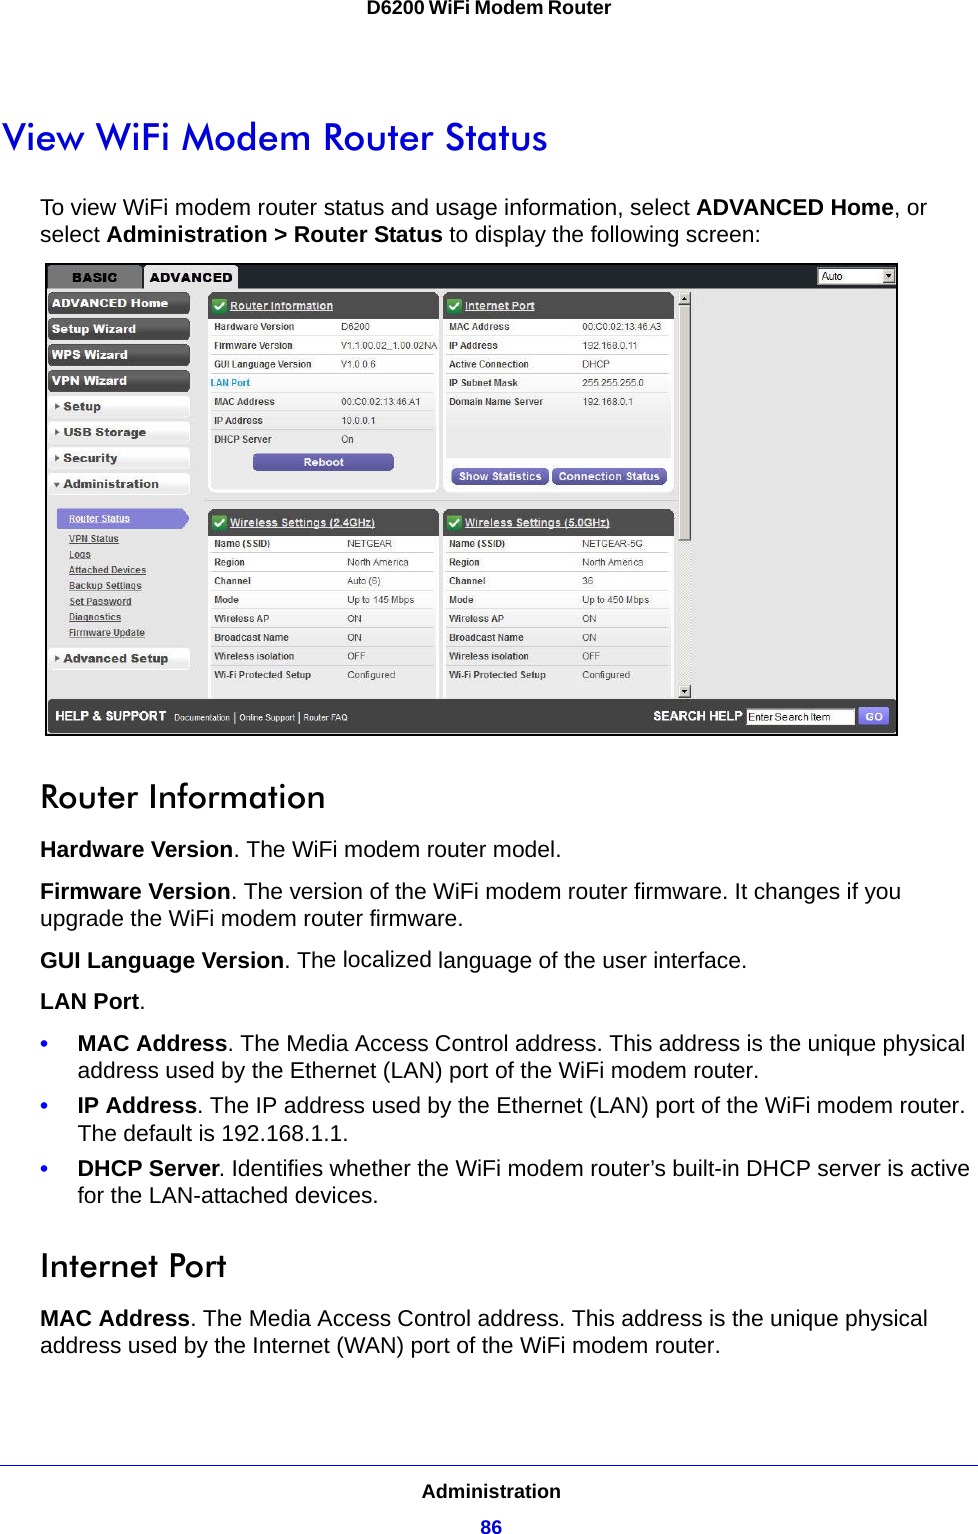 Administration86D6200 WiFi Modem Router View WiFi Modem Router StatusTo view WiFi modem router status and usage information, select ADVANCED Home, or select Administration &gt; Router Status to display the following screen: Router InformationHardware Version. The WiFi modem router model.Firmware Version. The version of the WiFi modem router firmware. It changes if you upgrade the WiFi modem router firmware.GUI Language Version. The localized language of the user interface.LAN Port.•MAC Address. The Media Access Control address. This address is the unique physical address used by the Ethernet (LAN) port of the WiFi modem router. •IP Address. The IP address used by the Ethernet (LAN) port of the WiFi modem router. The default is 192.168.1.1.•DHCP Server. Identifies whether the WiFi modem router’s built-in DHCP server is active for the LAN-attached devices.Internet PortMAC Address. The Media Access Control address. This address is the unique physical address used by the Internet (WAN) port of the WiFi modem router.